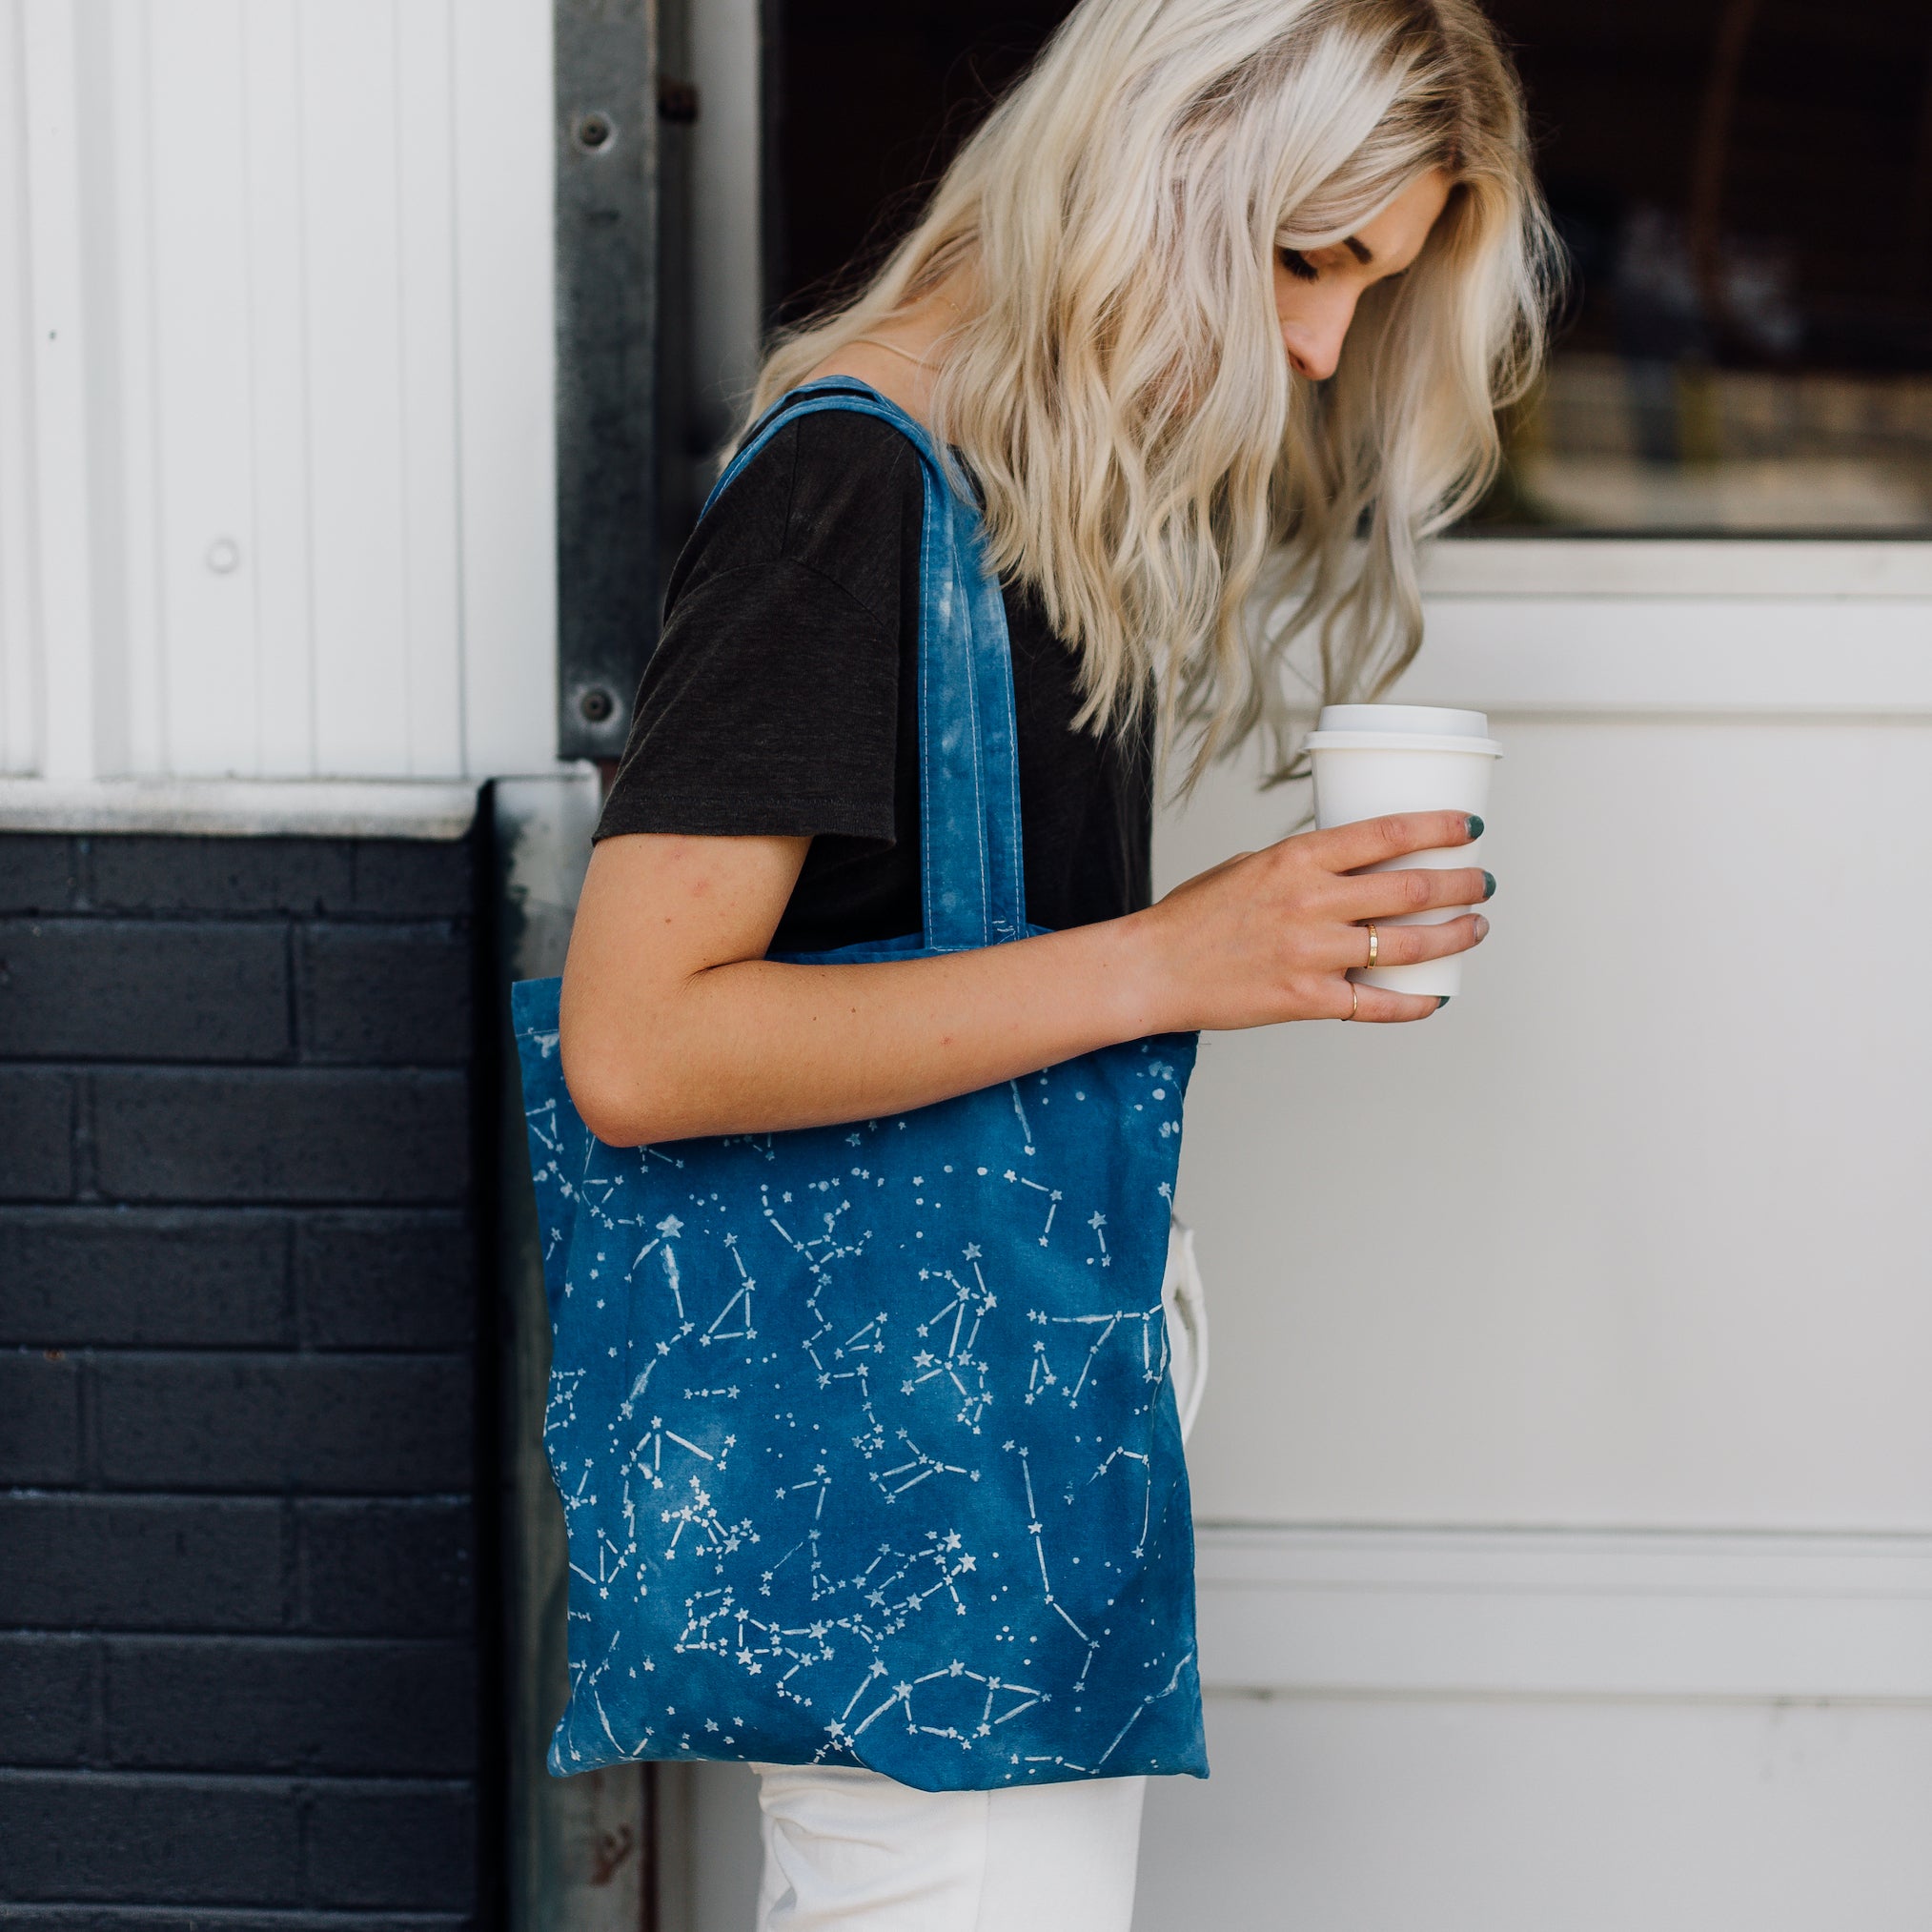 Woman carrying take-out coffee and wearing shoulder bag dyed using clay resist and a stencil to create constellation patterns